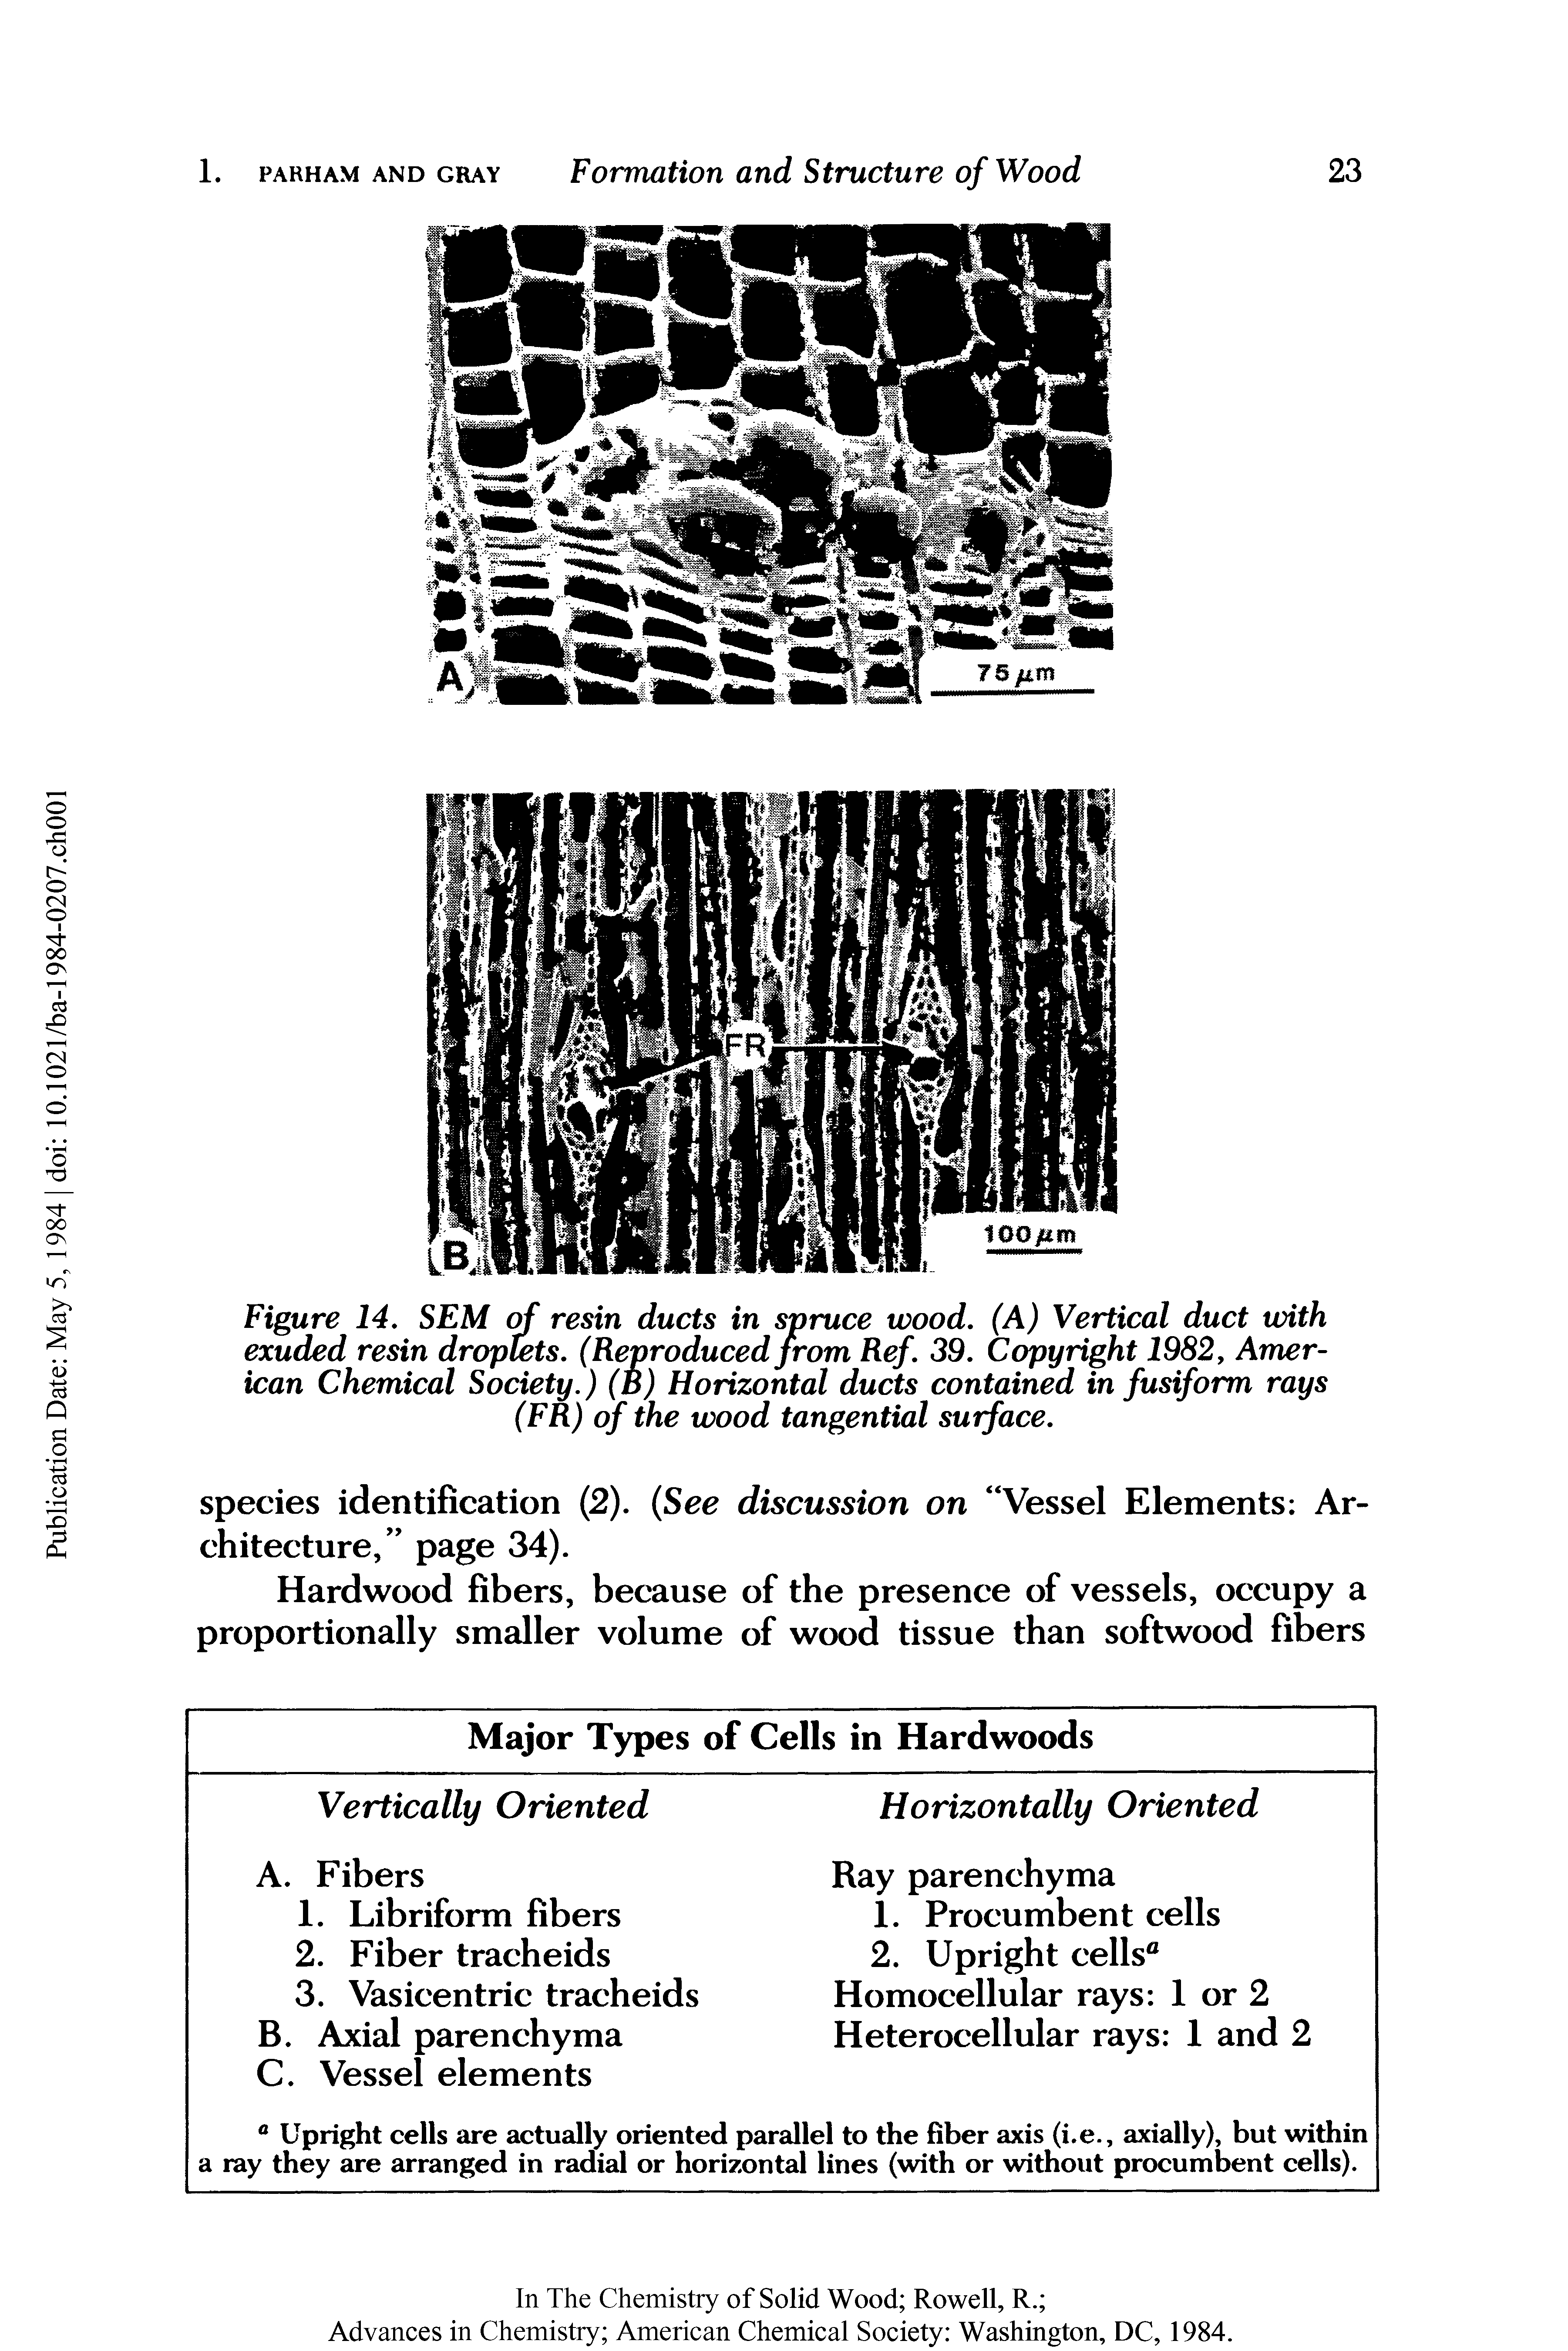 Figure 14, SEM resin ducts in spruce wood. (A) Vertical duct with exuded resin droplets. (Reproduced from Ref. 39. C( yright 1982, American Chemical Society.) (d) Horizontal ducts contained in fusiform rays (FR) of the wood tangential surface.